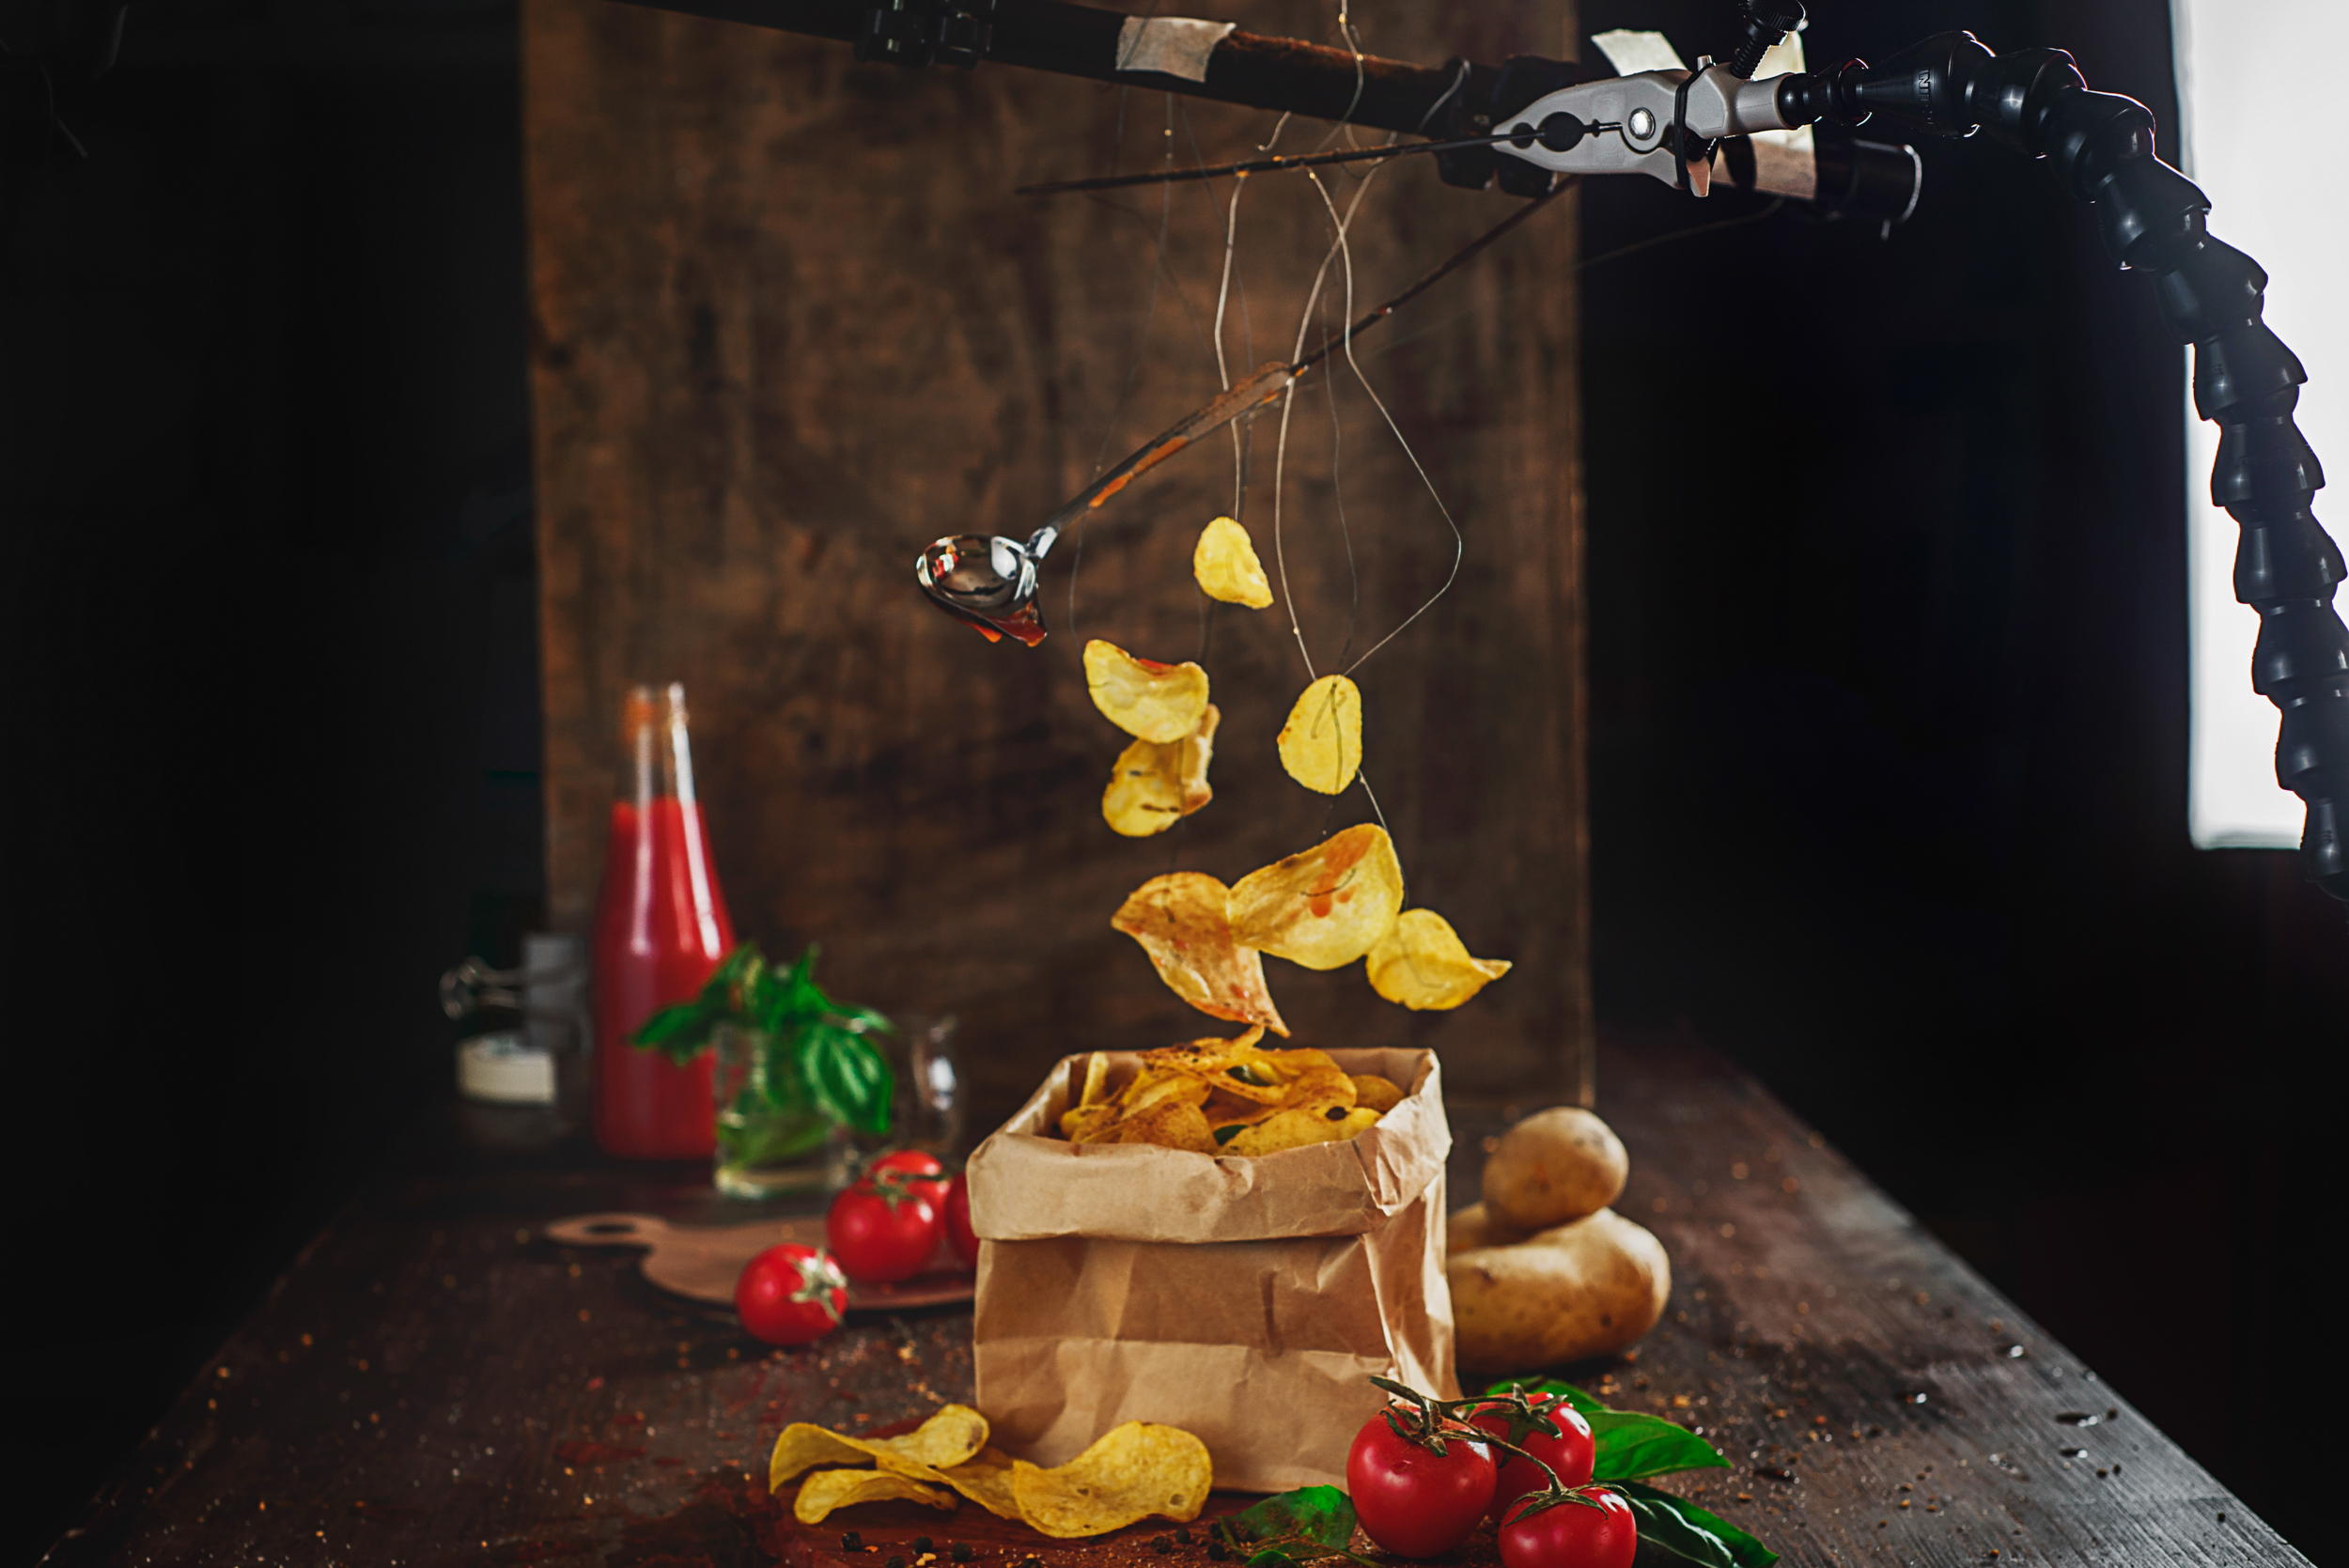 Tutorial: How To Make Food Levitate In Your Still Life Photos